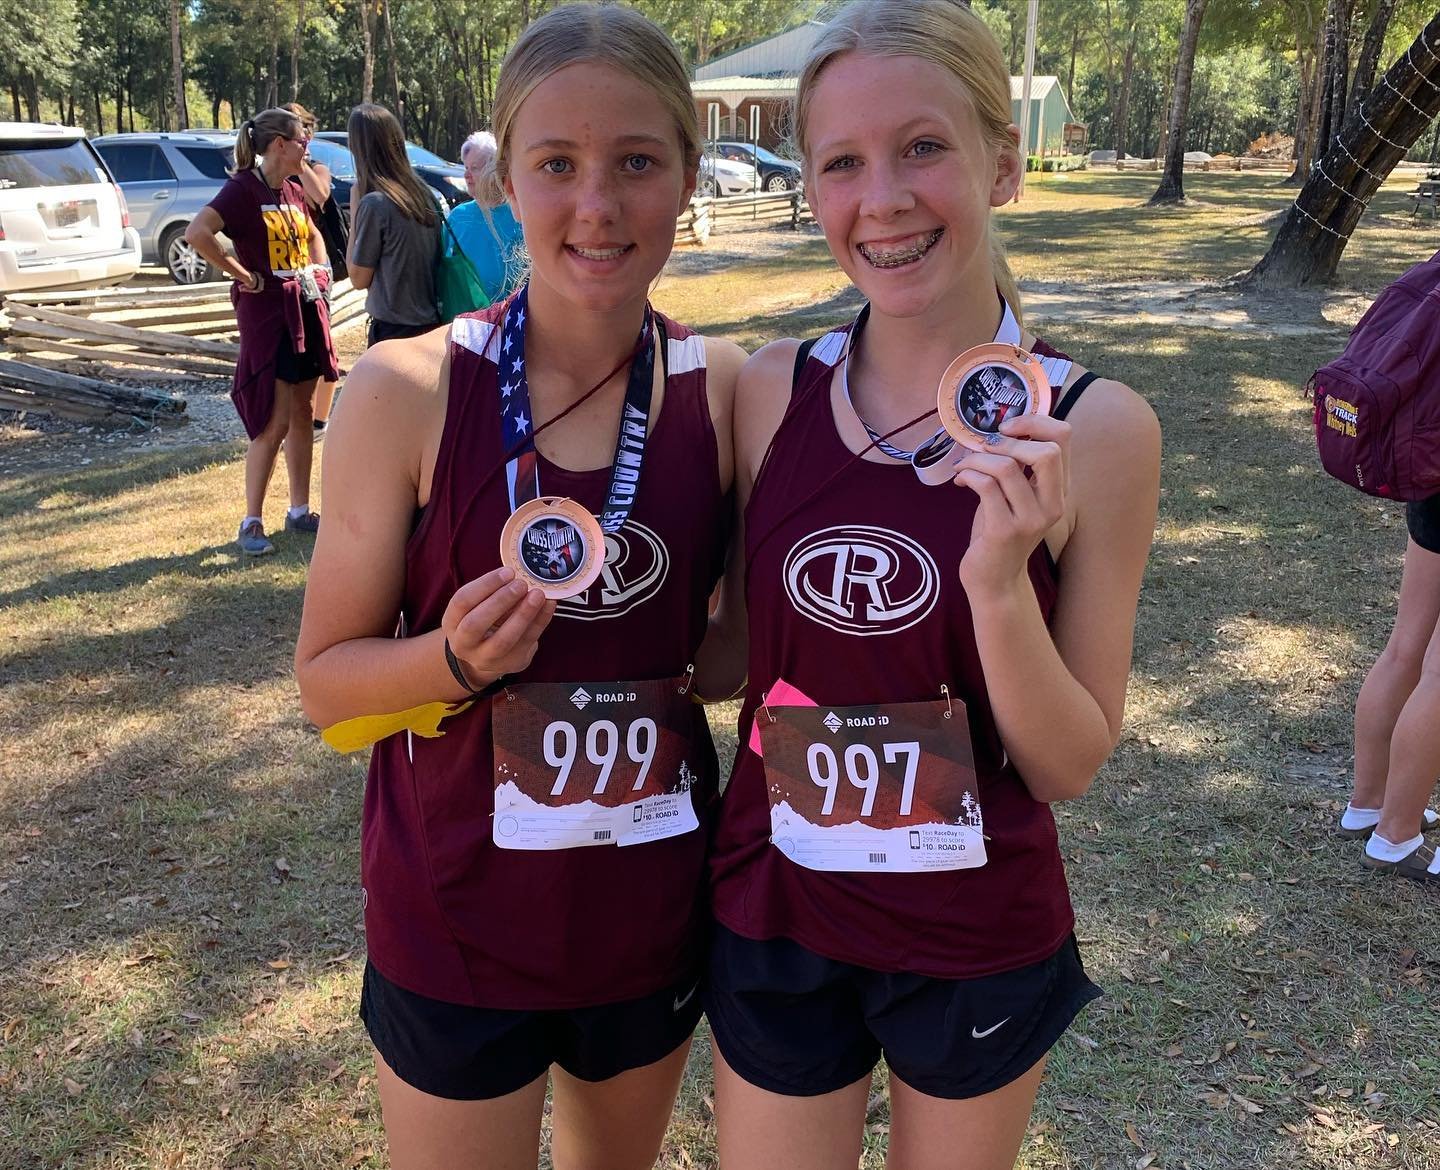 Kinsley Stevens and Ryan McGilvray from Robertsdale registered top-15 finishes at the Class 6A Section 1 Championship to help the Golden Bears qualify for the state championship meet. The pair are among the 83 local runners that will be making a repeat trip to state after qualifying for last year’s meet as well.